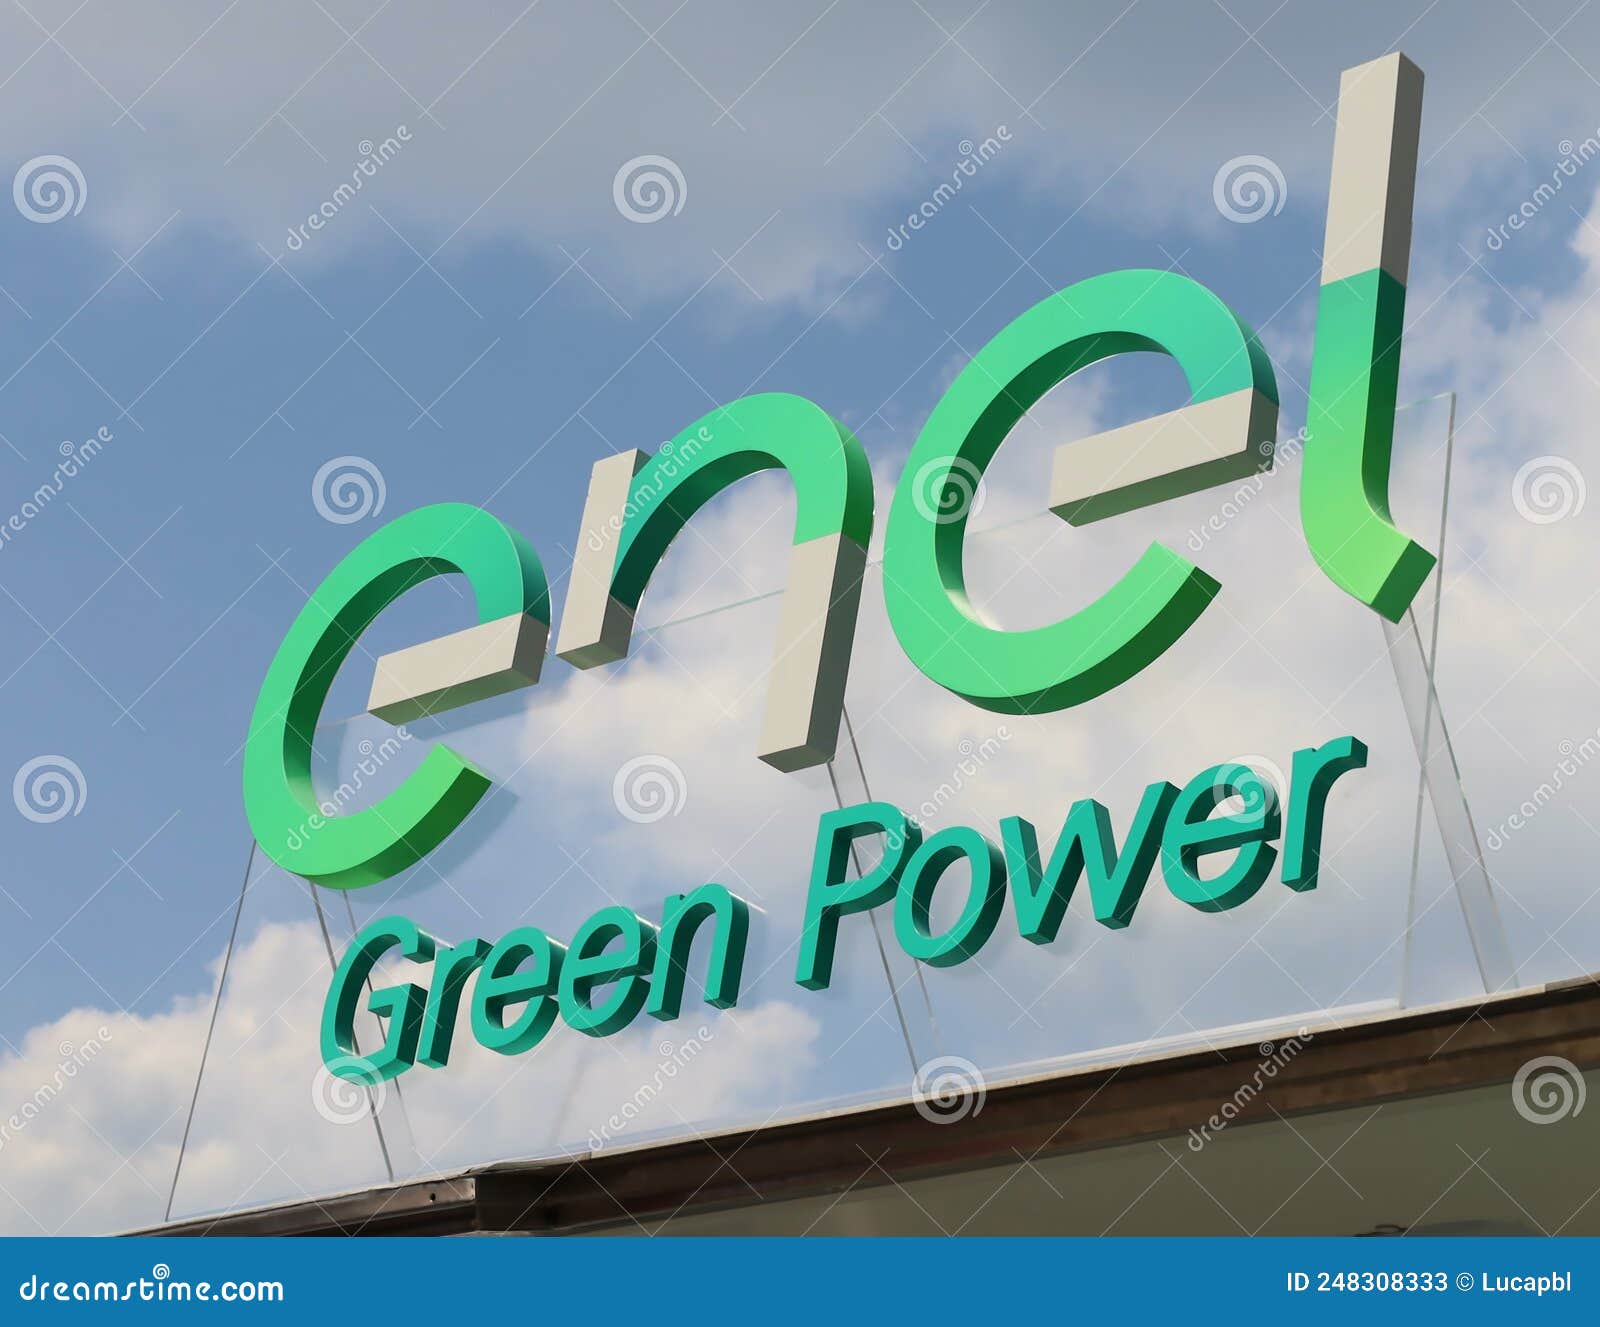 https://thumbs.dreamstime.com/z/cividale-italy-may-enel-green-power-logo-commercial-stand-multinational-renewable-energy-corporation-italian-248308333.jpg